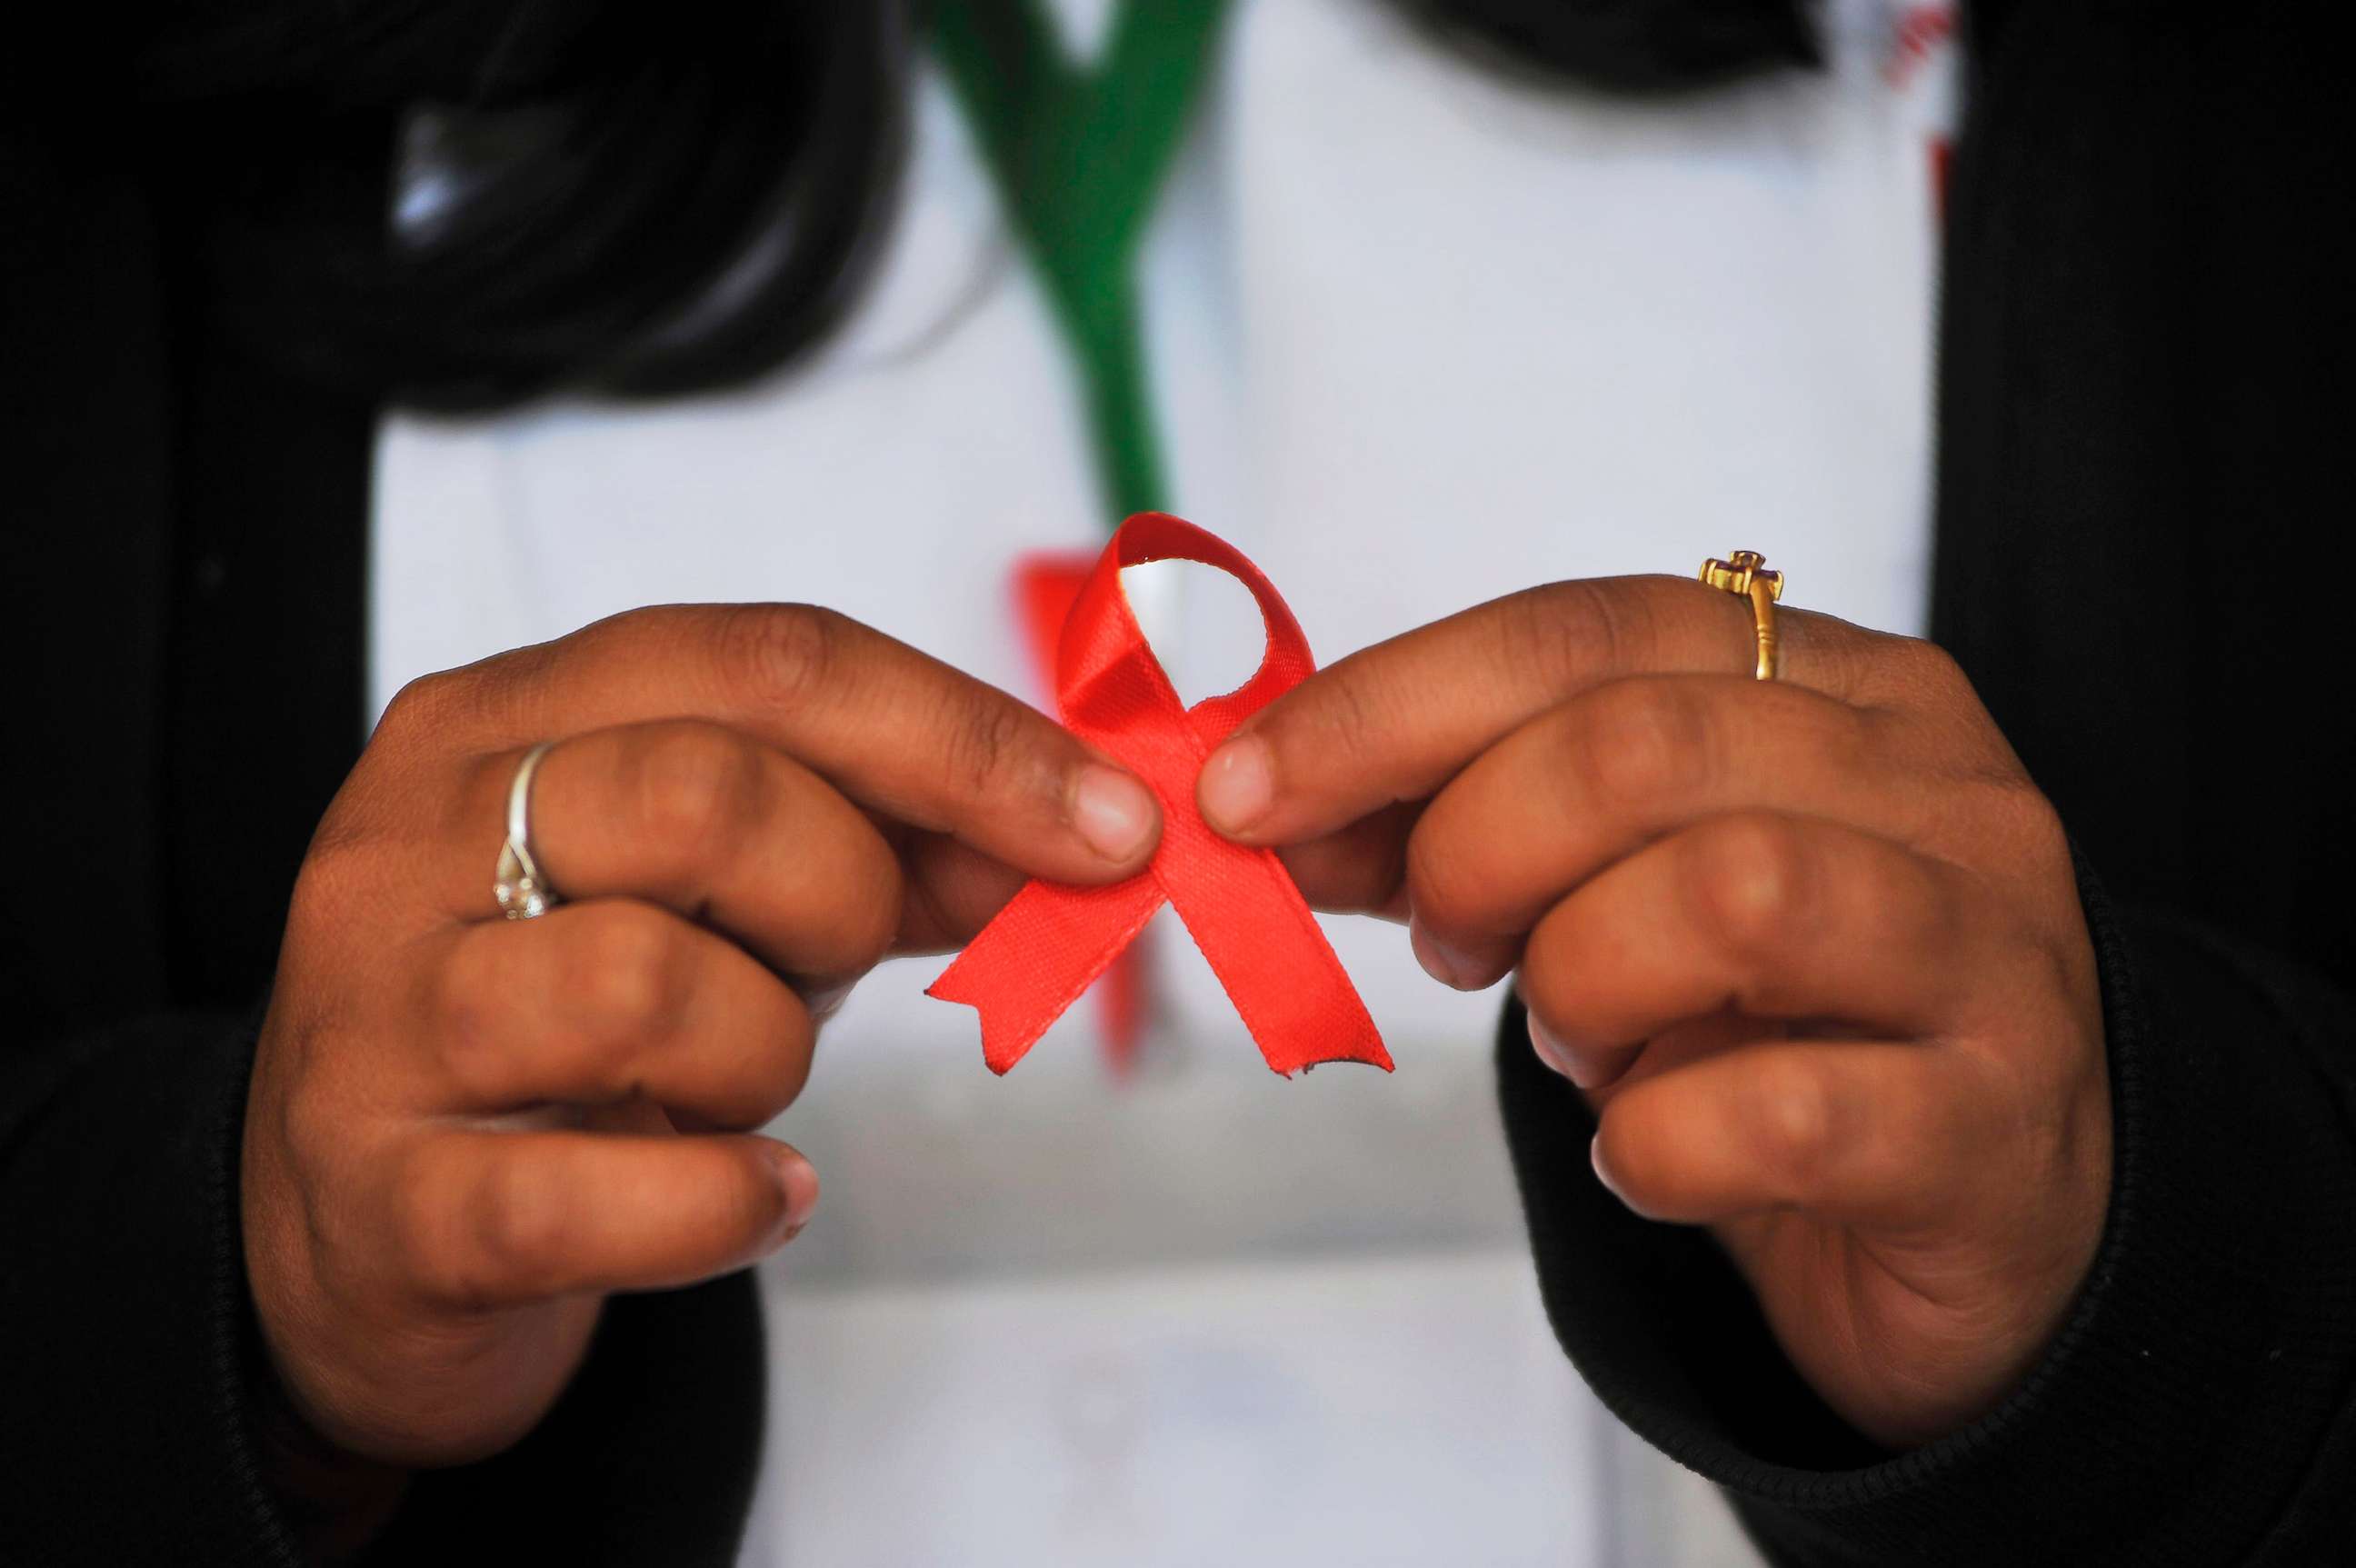 PHOTO: A Nepalese youth shows AIDS symbol Red Ribbon on celebrates of 29th World AIDS Day in Kathmandu, Nepal, Dec. 1, 2016.